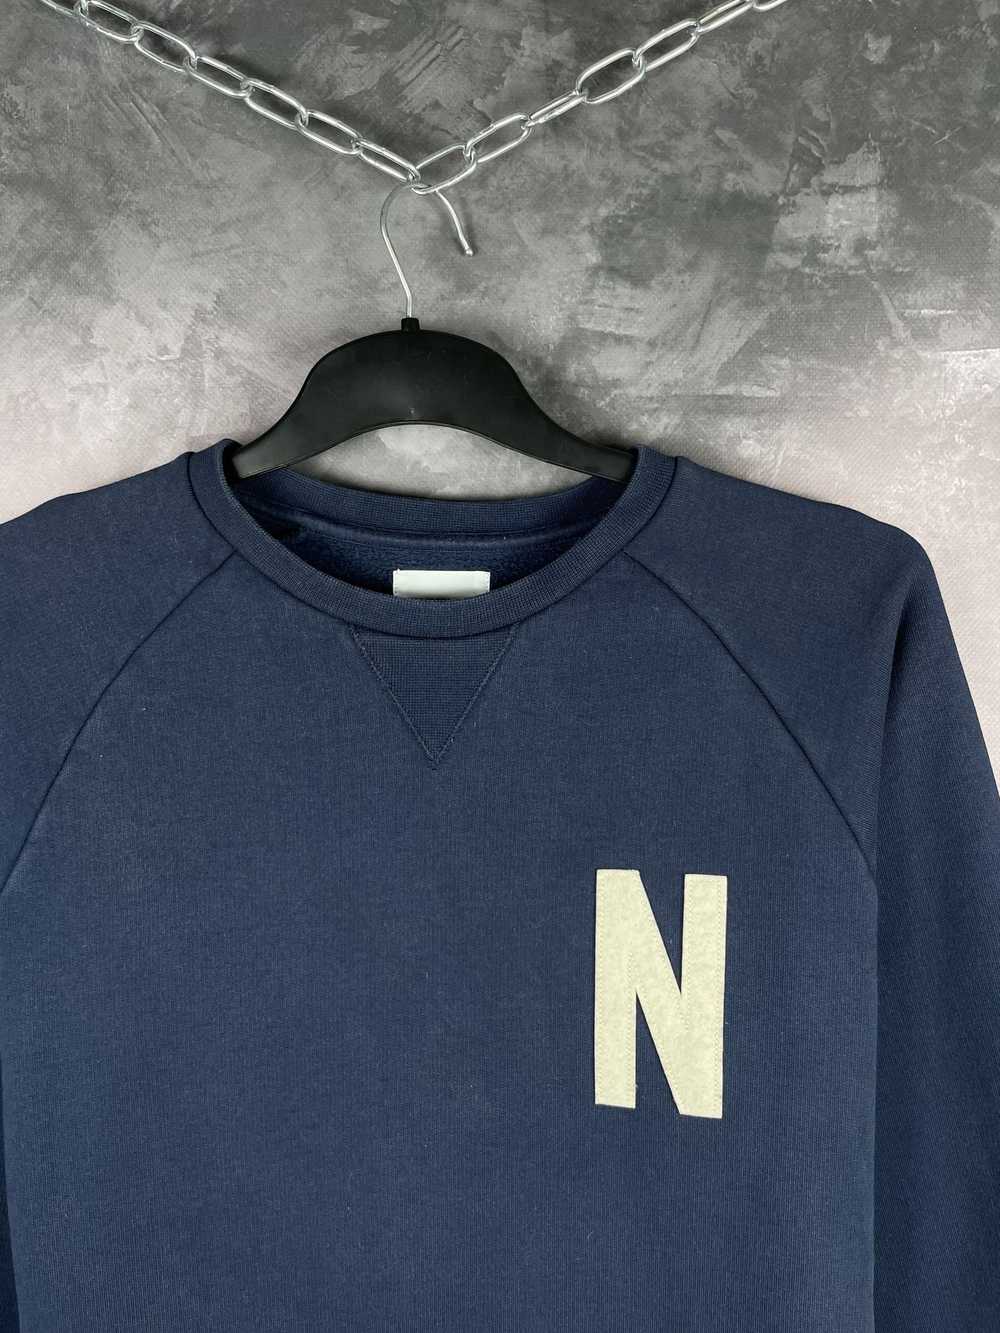 Norse Projects × Streetwear × Vintage Norse Proje… - image 3